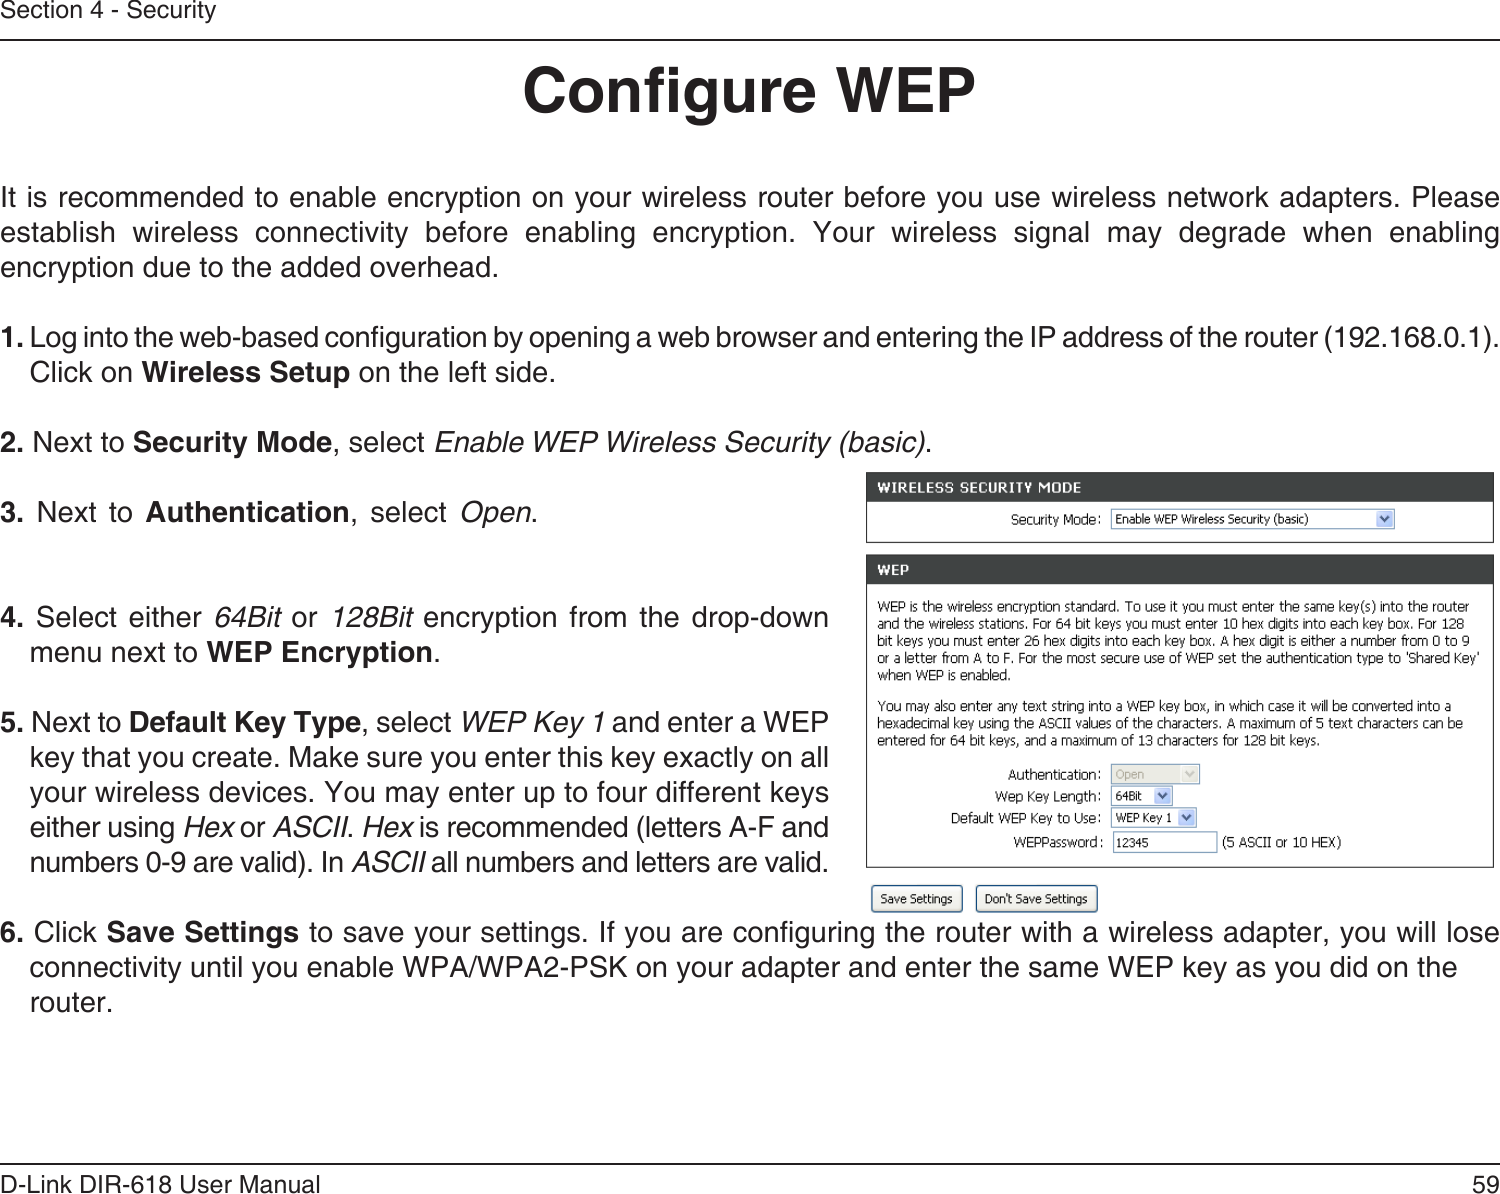 59D-Link DIR-618 User ManualSection 4 - SecurityCongure WEPIt is recommended to enable encryption on your wireless router before you use wireless network adapters. Pleaseestablish wireless connectivity before enabling encryption. Your wireless signal may degrade when enablingencryption due to the added overhead.1. Log into the web-based conguration by opening a web browser and entering the IP address of the router (192.168.0.1).   Click on Wireless Setup on the left side.2. Next to Security Mode, select Enable WEP Wireless Security (basic).3. Next to Authentication, select Open. 4.  Select  either  64Bit  or  128Bit  encryption  from  the  drop-downmenu next to WEP Encryption. 5. Next to Default Key Type, select WEP Key 1 and enter a WEPkey that you create. Make sure you enter this key exactly on allyour wireless devices. You may enter up to four different keyseither using Hex or ASCII. Hex is recommended (letters A-F andnumbers 0-9 are valid). In ASCII all numbers and letters are valid.6. Click Save Settings to save your settings. If you are conguring the router with a wireless adapter, you will lose connectivity until you enable WPA/WPA2-PSK on your adapter and enter the same WEP key as you did on therouter.